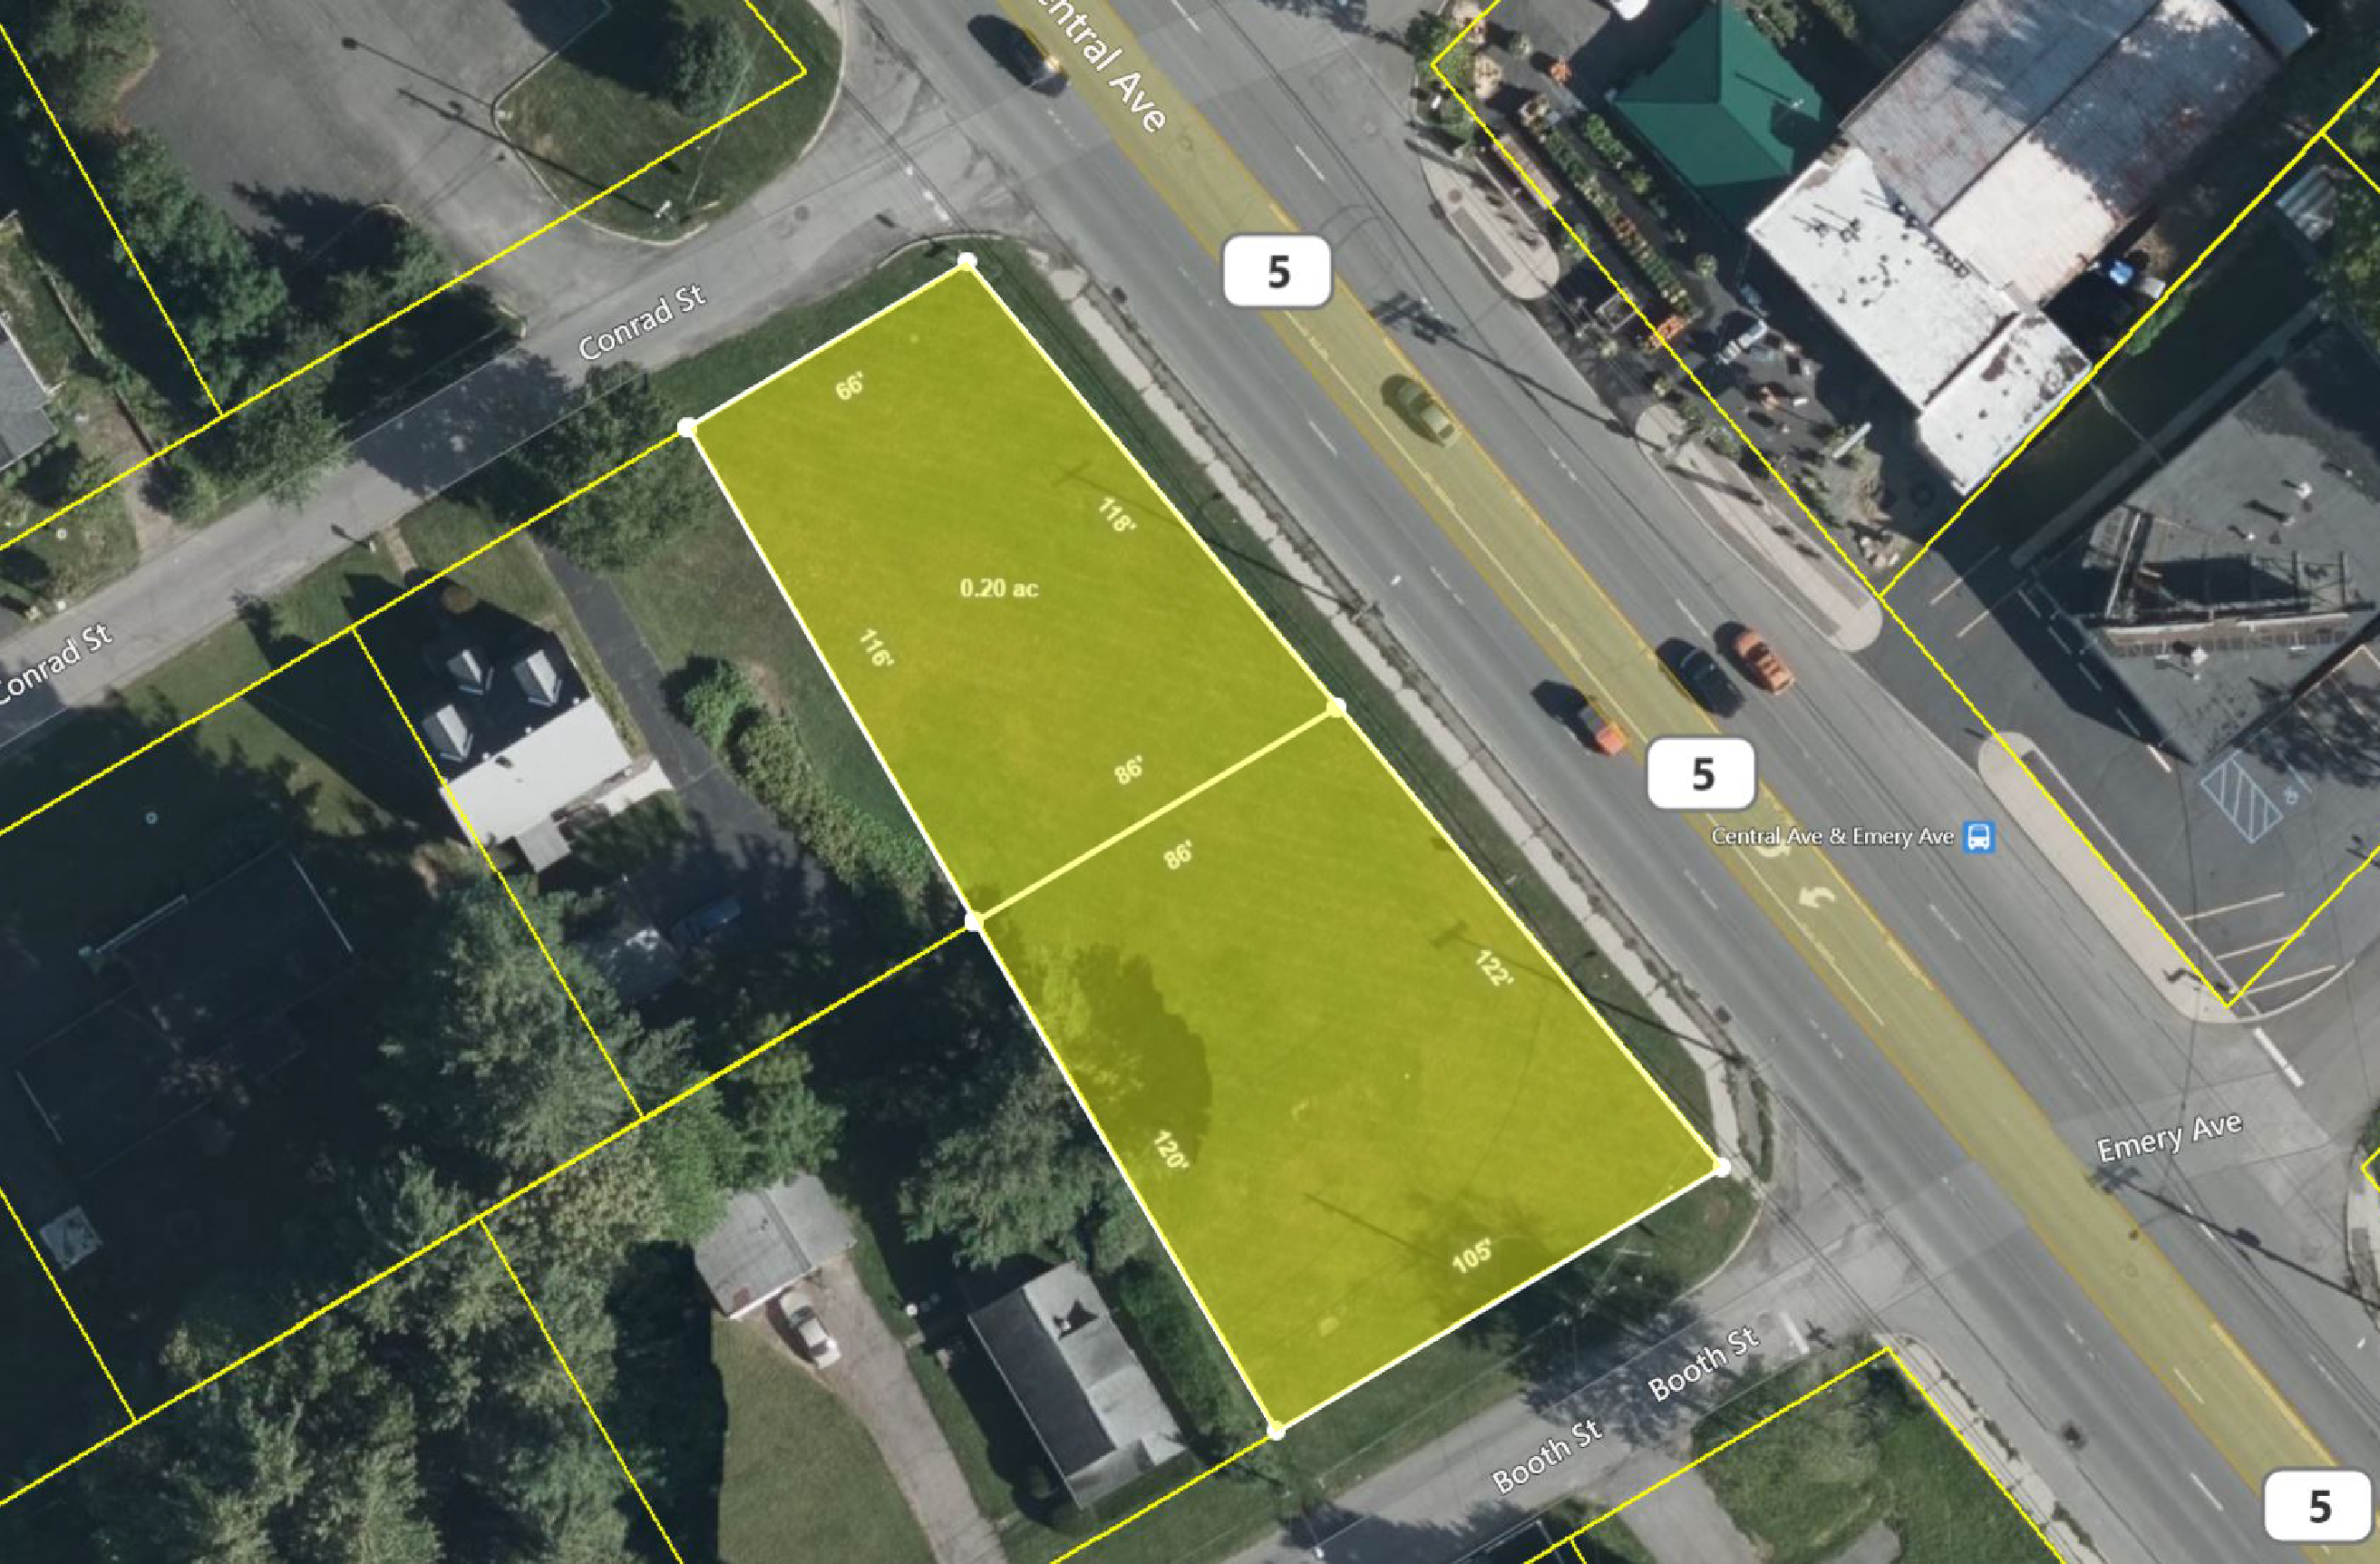 Aerial image showing land for sale in Colonie NY